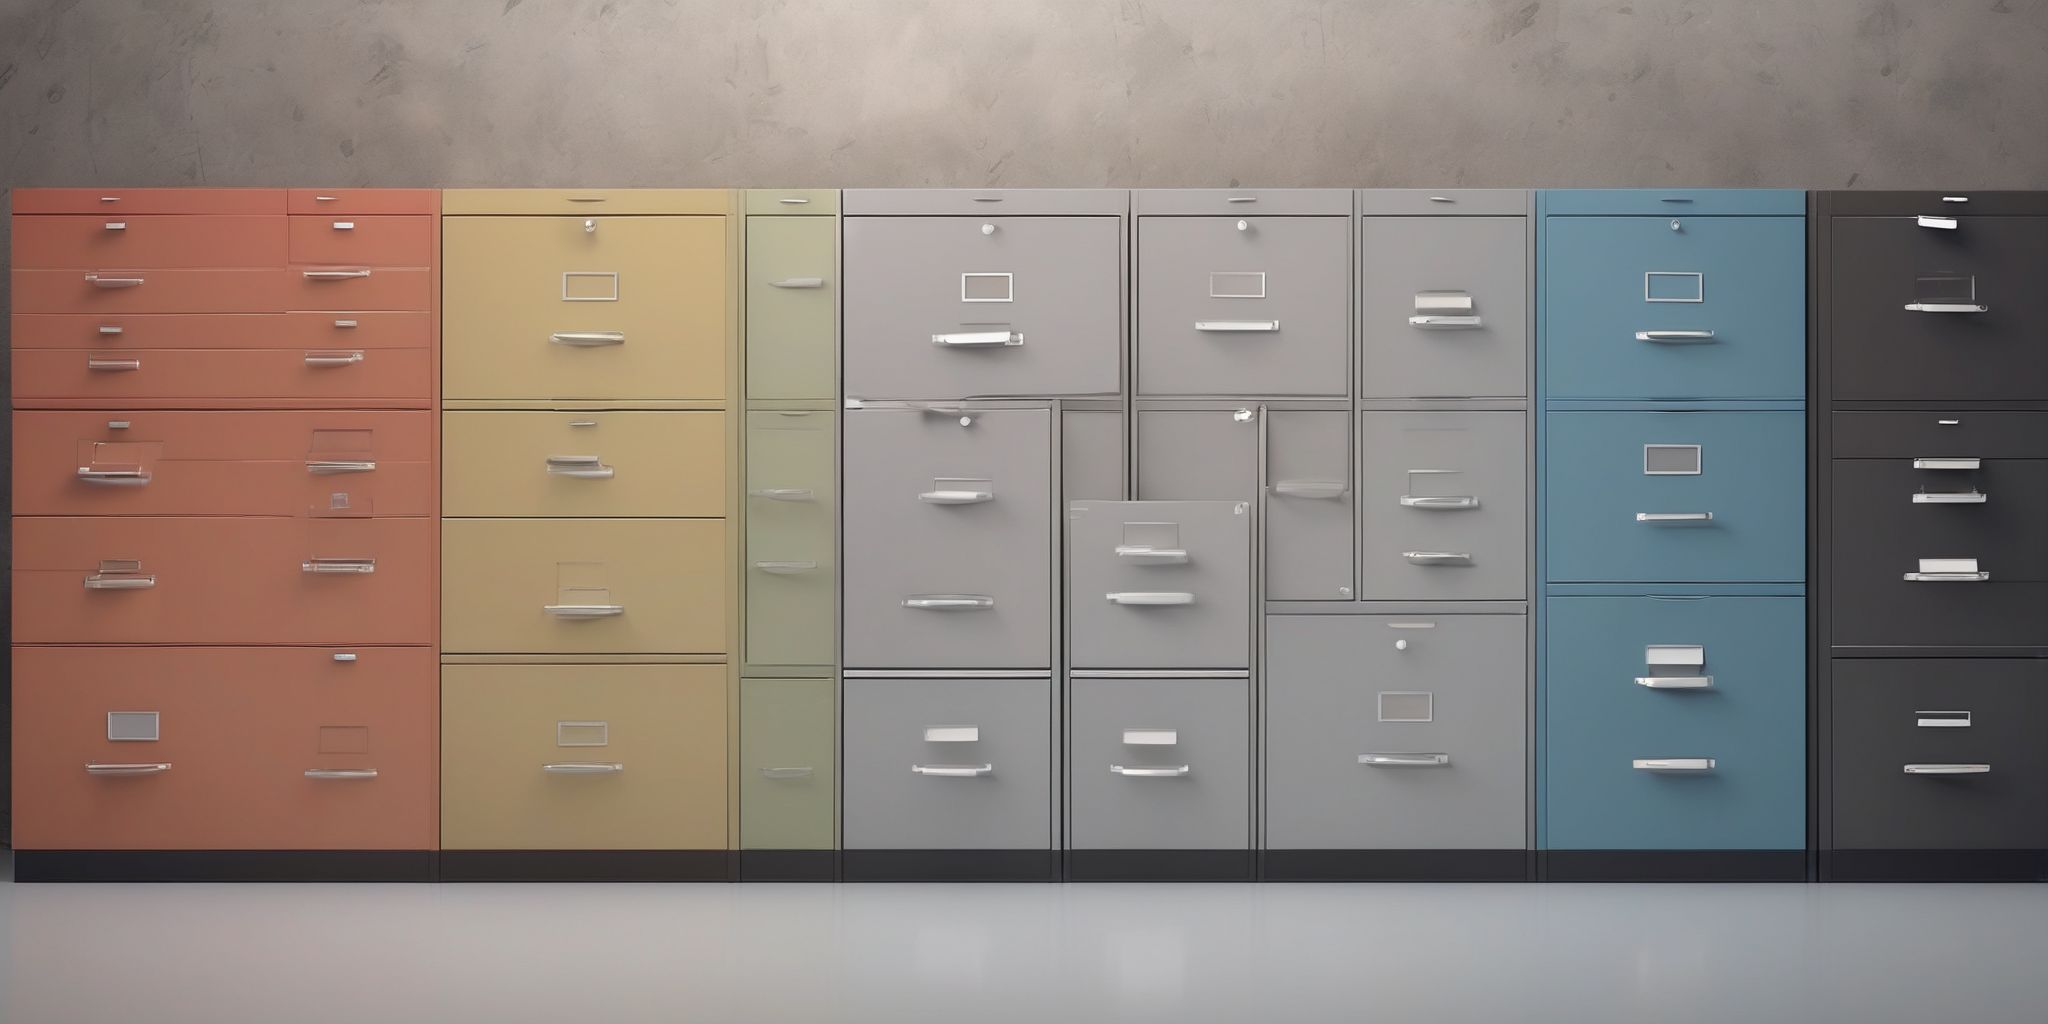 Filing cabinet  in realistic, photographic style